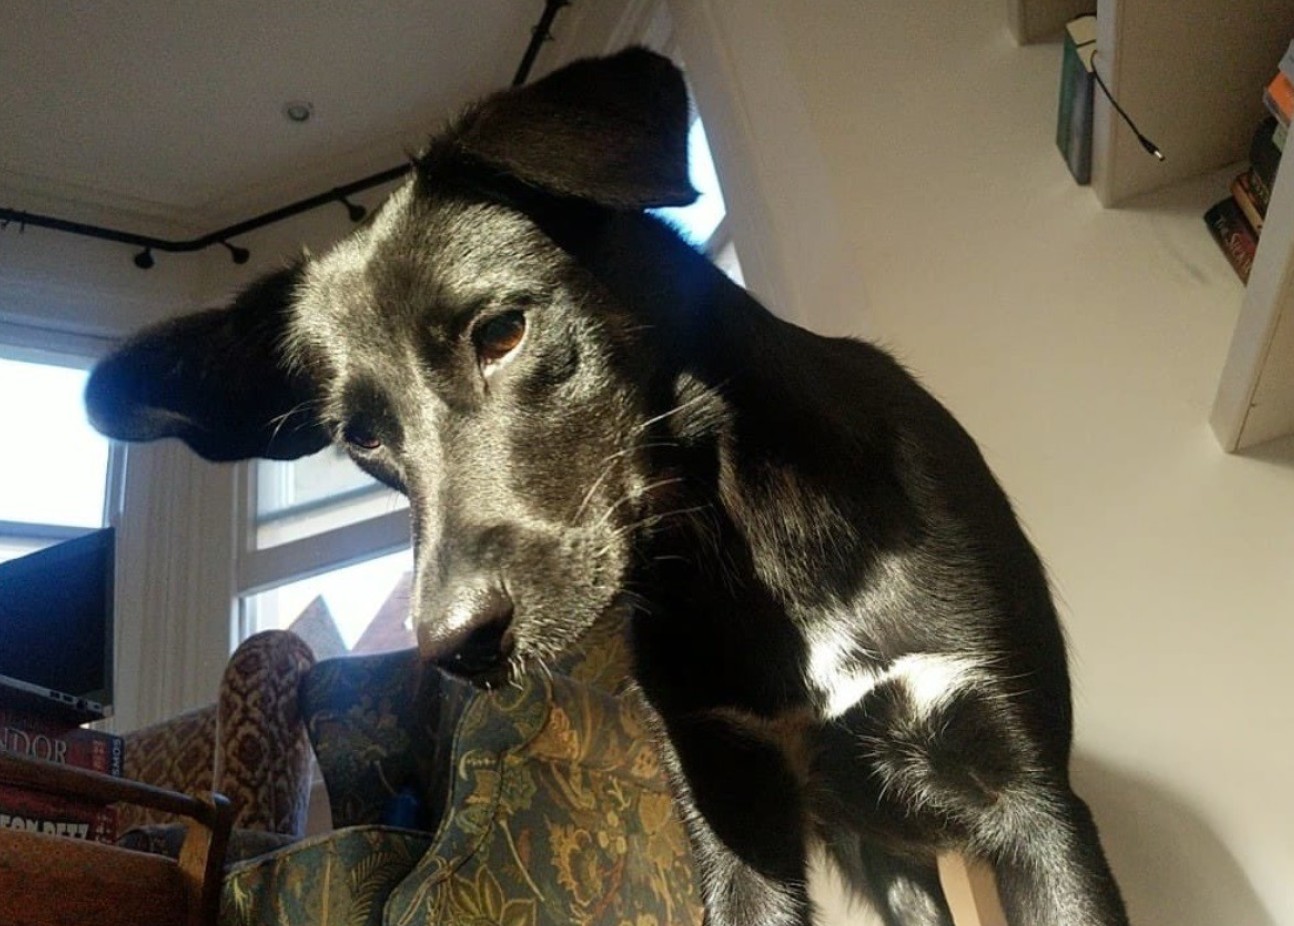 A photo of a young black dog with a white patch on chest. She has a long nose and floppy ears, and is looking down at the camera